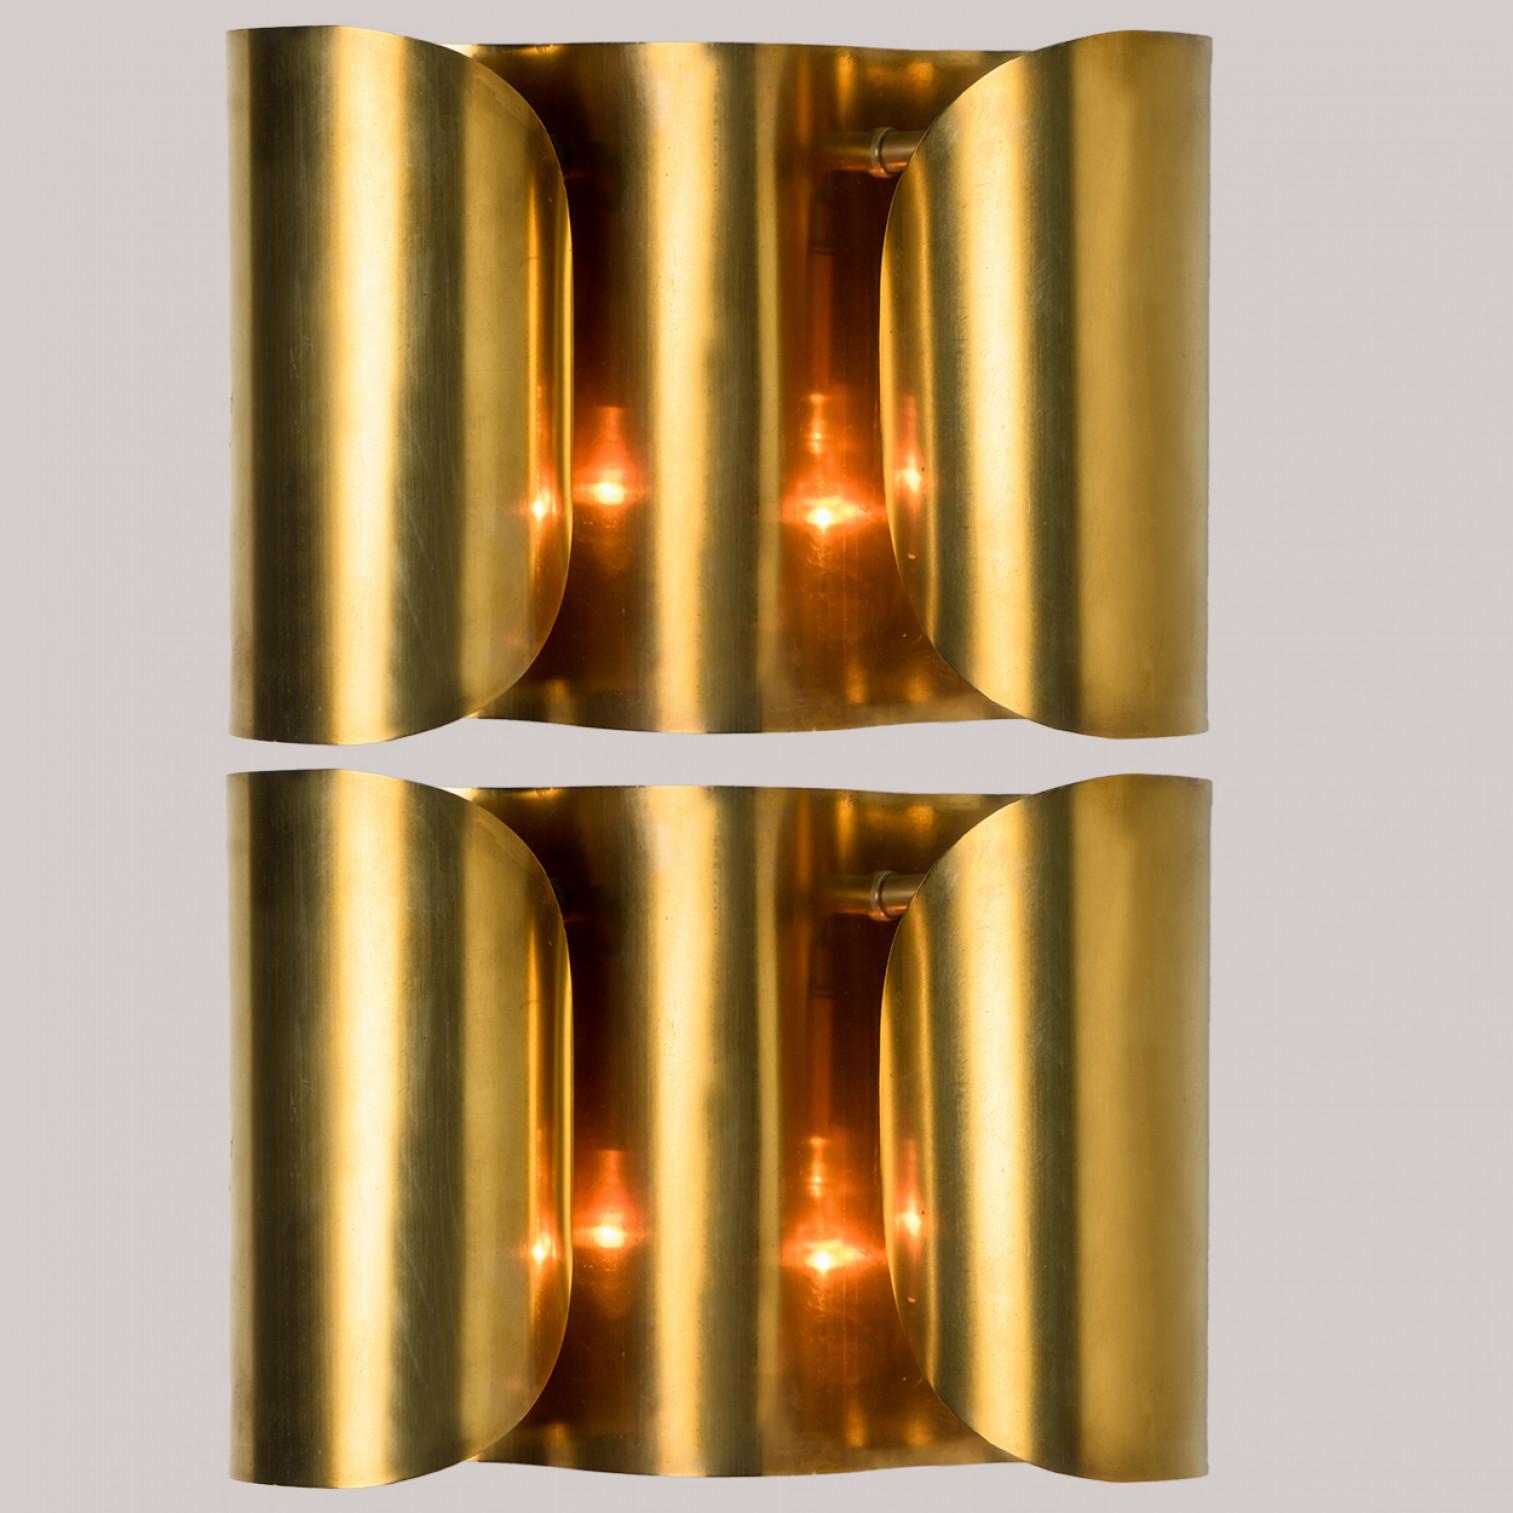 Several Curved Brass Wall Lights, 1970s For Sale 13